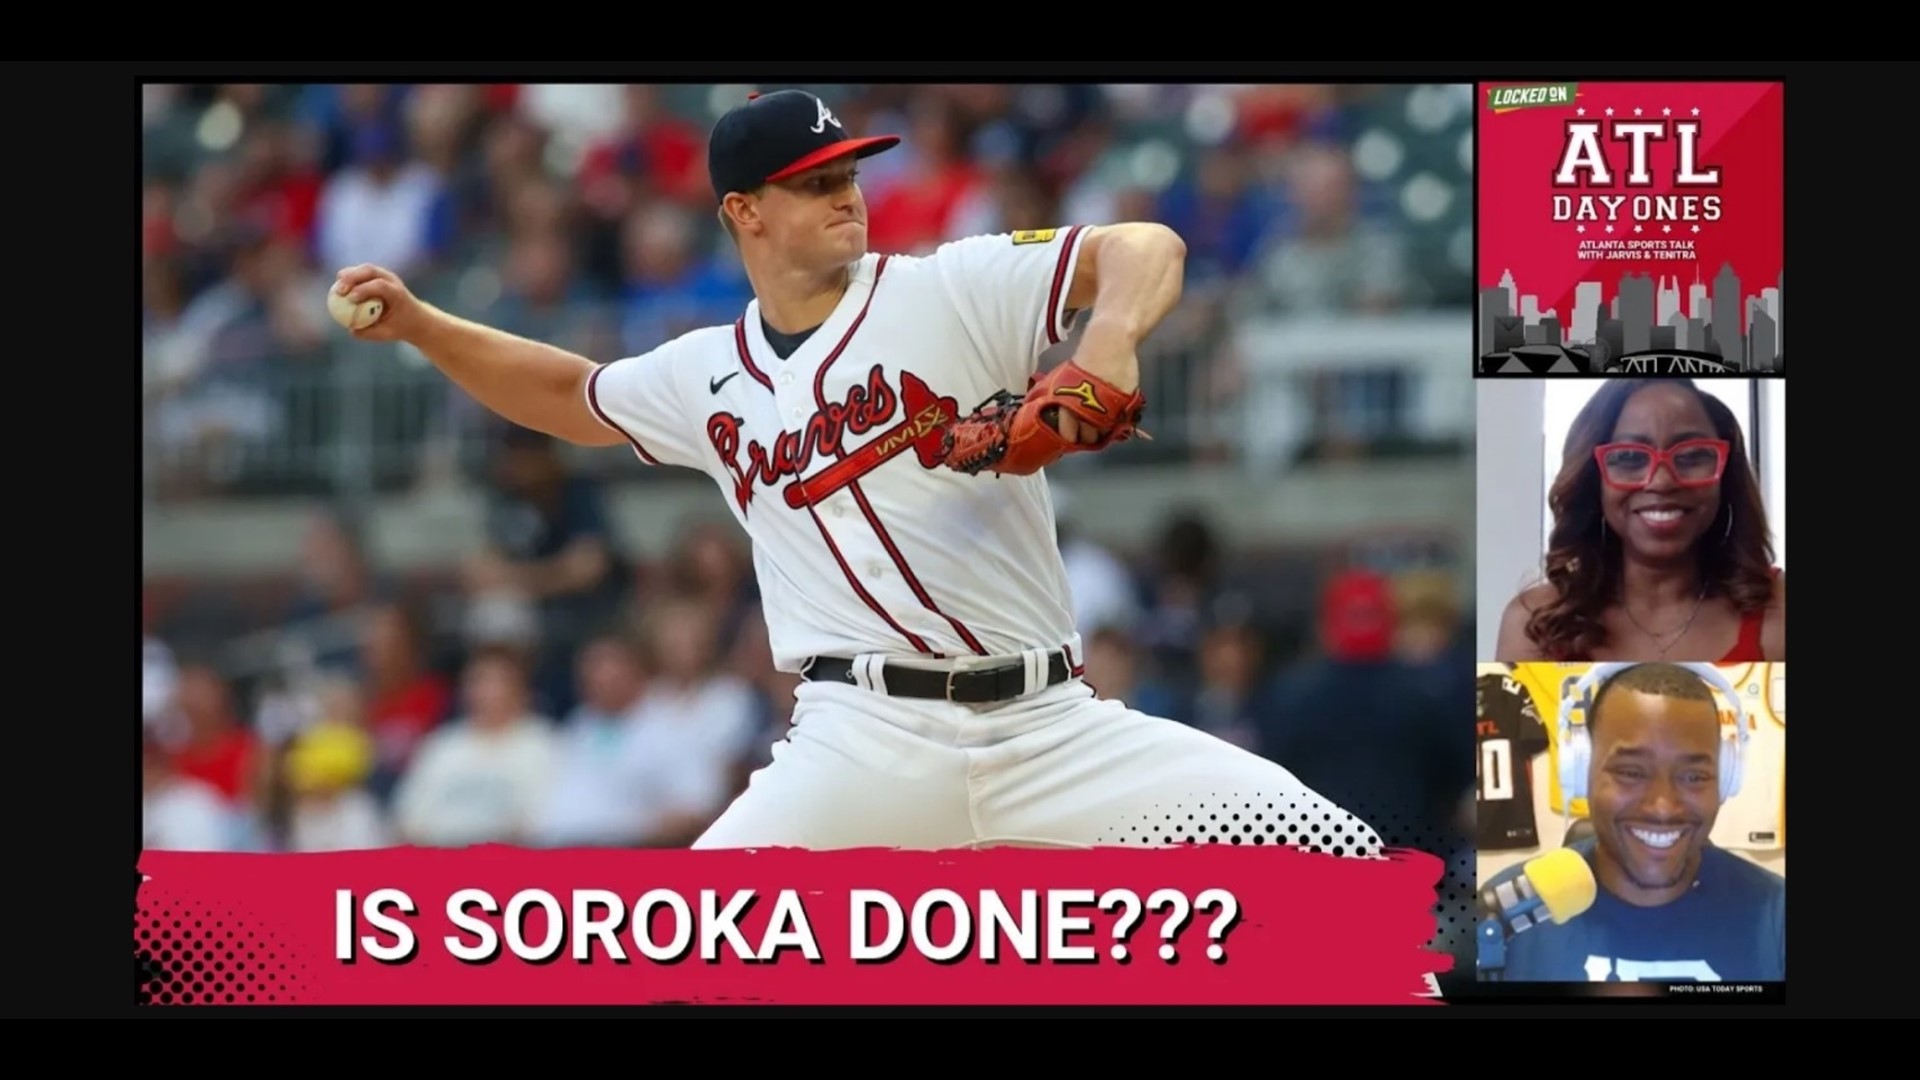 The Atlanta Braves lost a head scratcher last night to the St. Louis Cardinals 10-6 at Truist Park. Michael Soroka got roughed against the lowly Cardinals